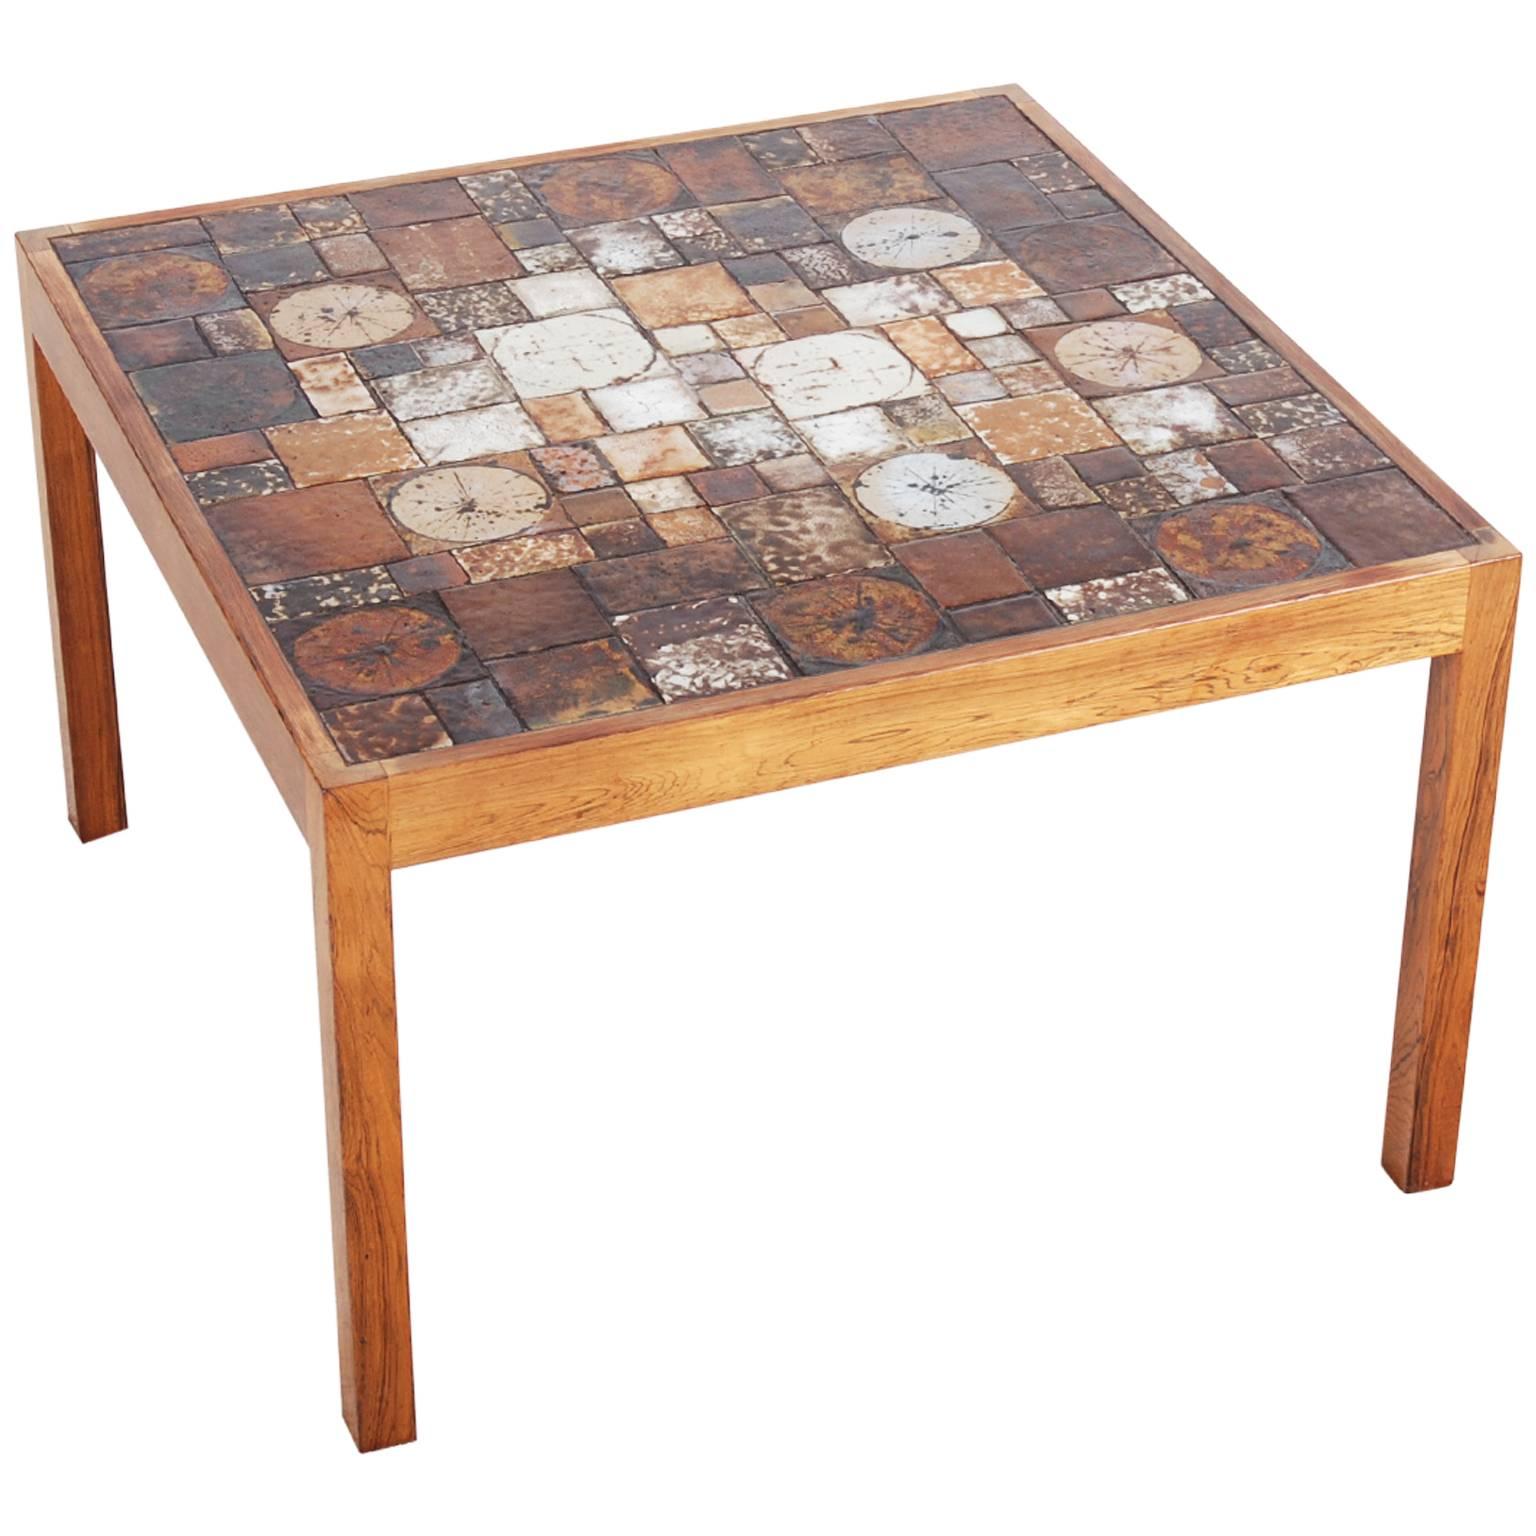 Danish Rosewood Coffee Table with Ceramic Tiles, 1960s